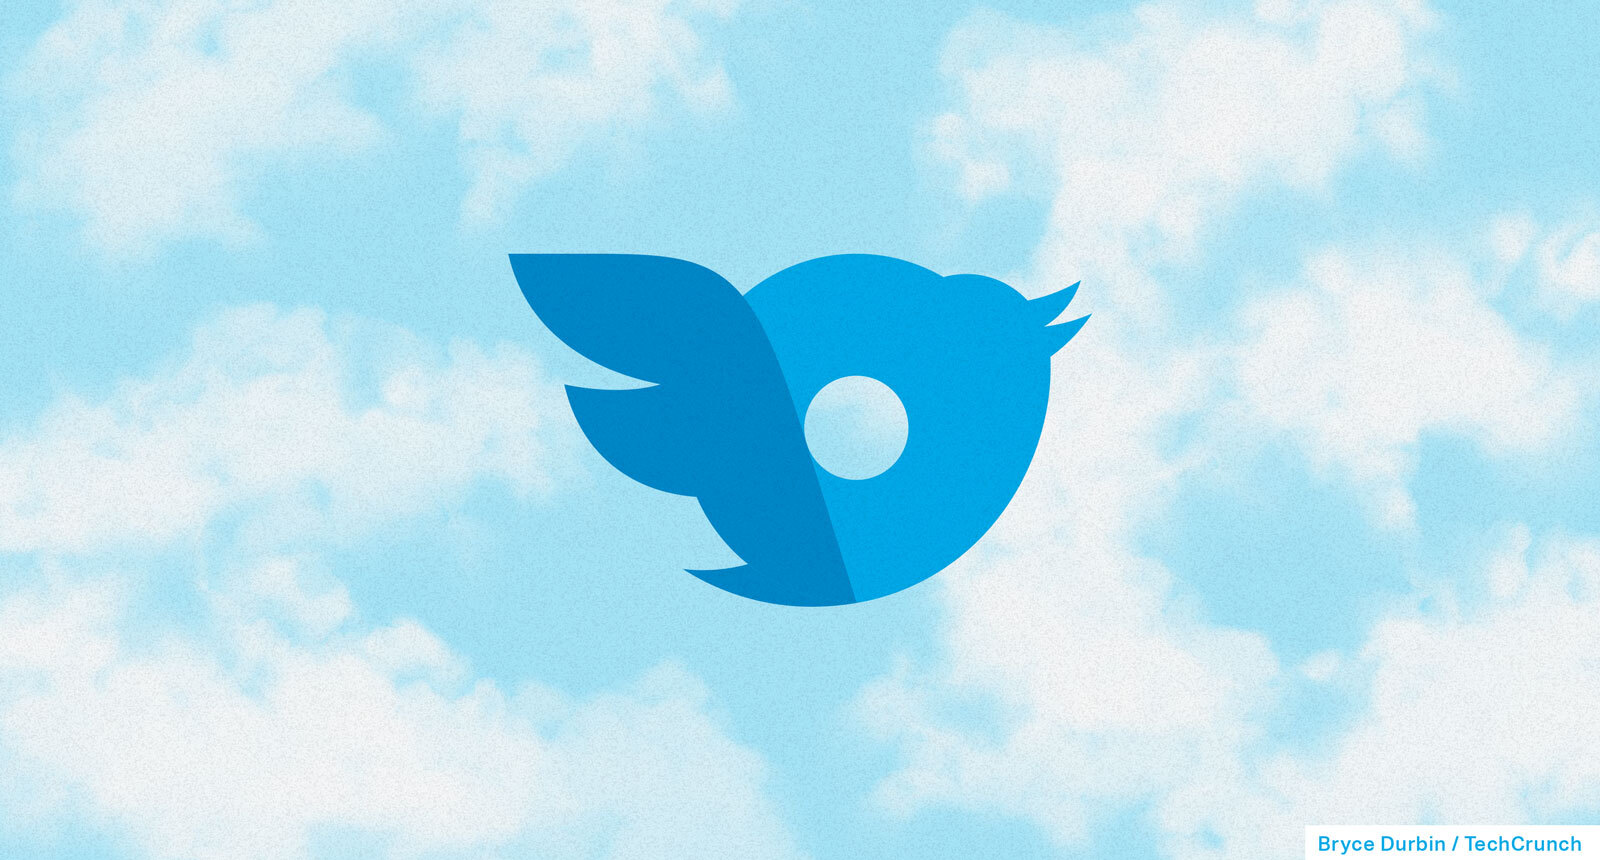 twitter and onlyfans logos blended on cloud background